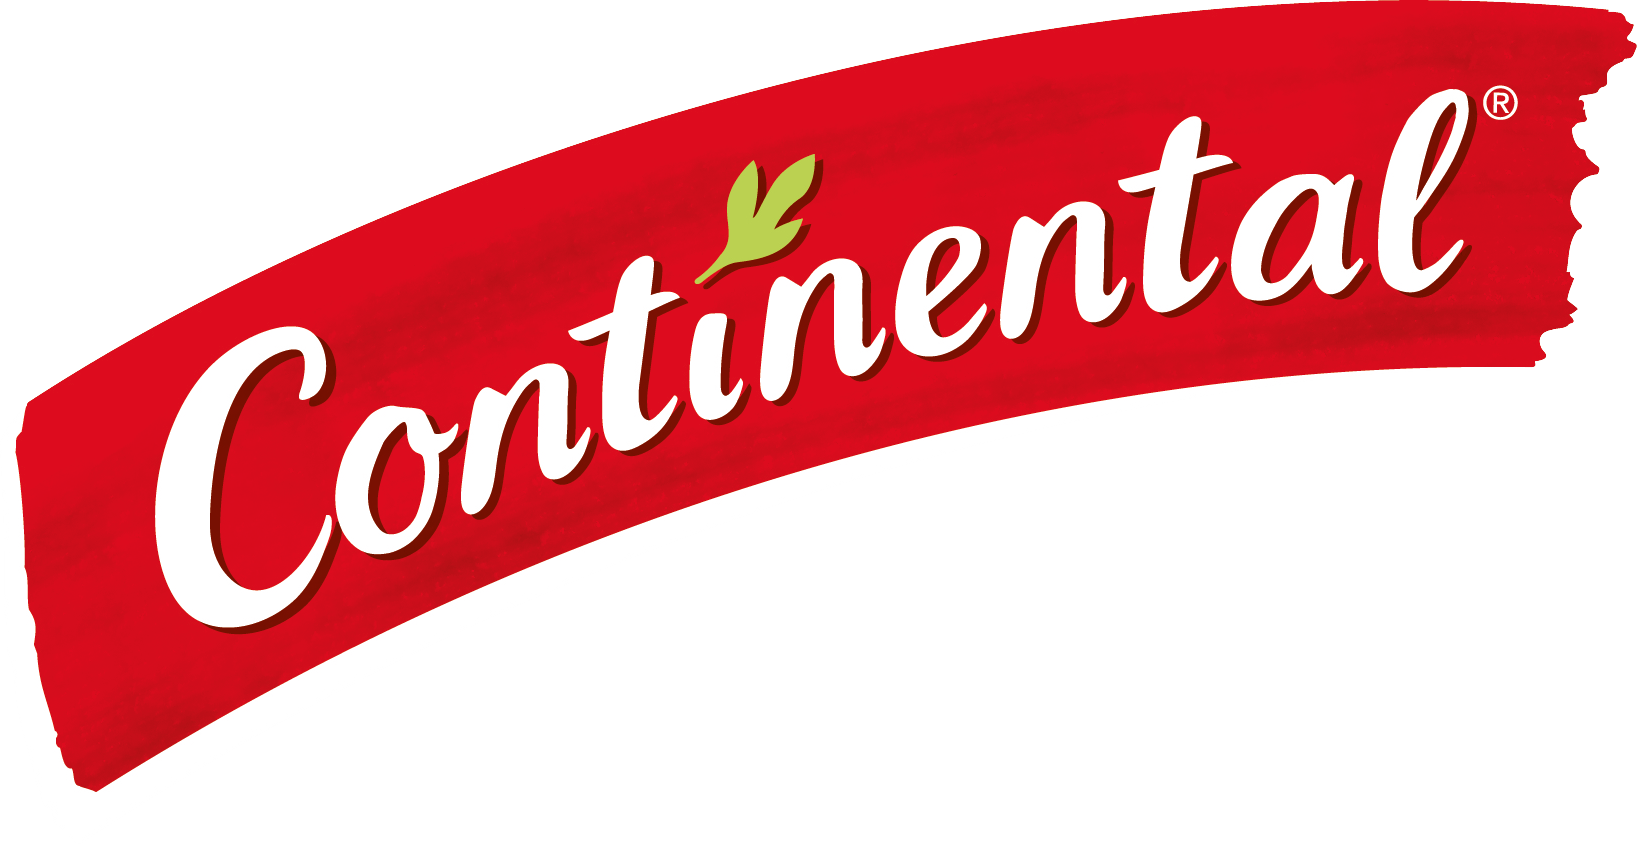 continental.png